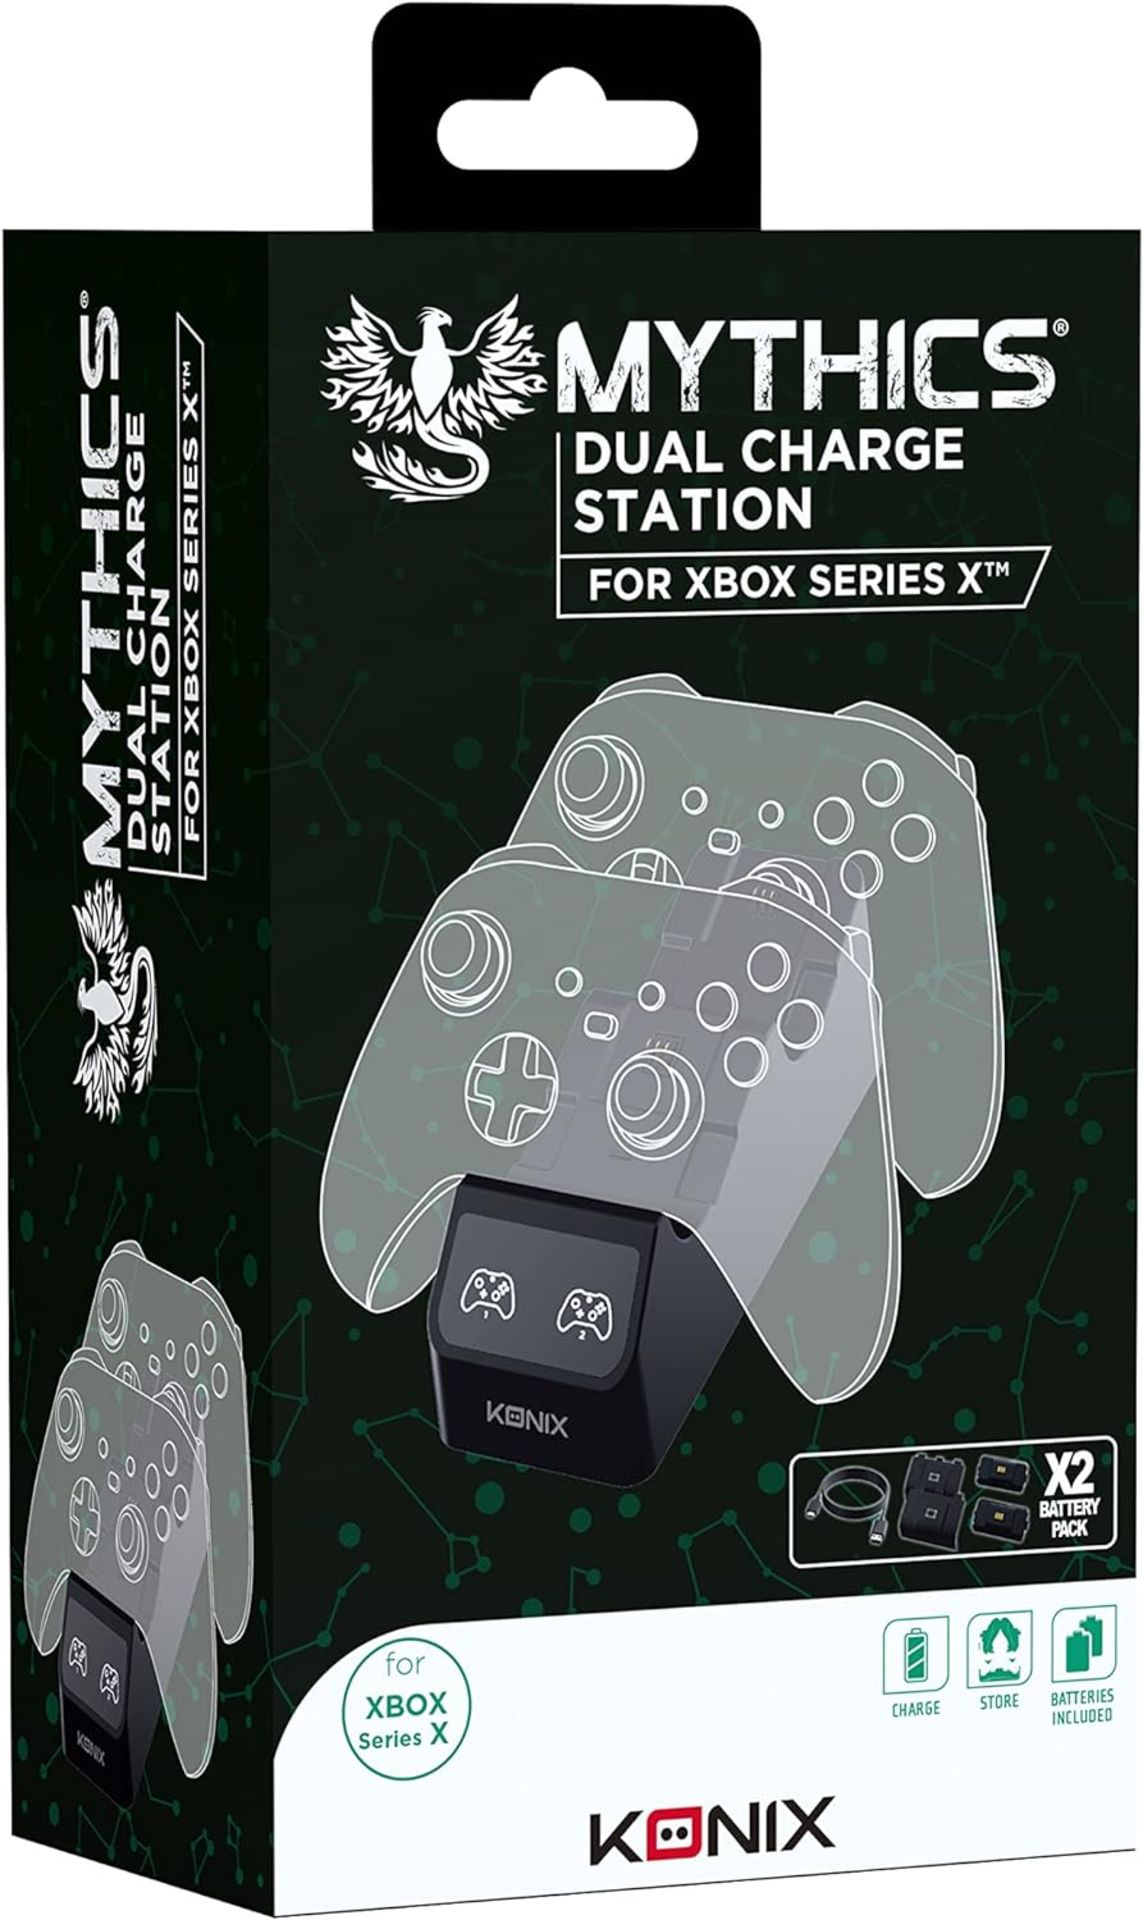 6x BRAND NEW KONIX MYTHICS DUAL CHARGE STATION FOR XBOX SERIES X CONTROLLERS. (R16-13)